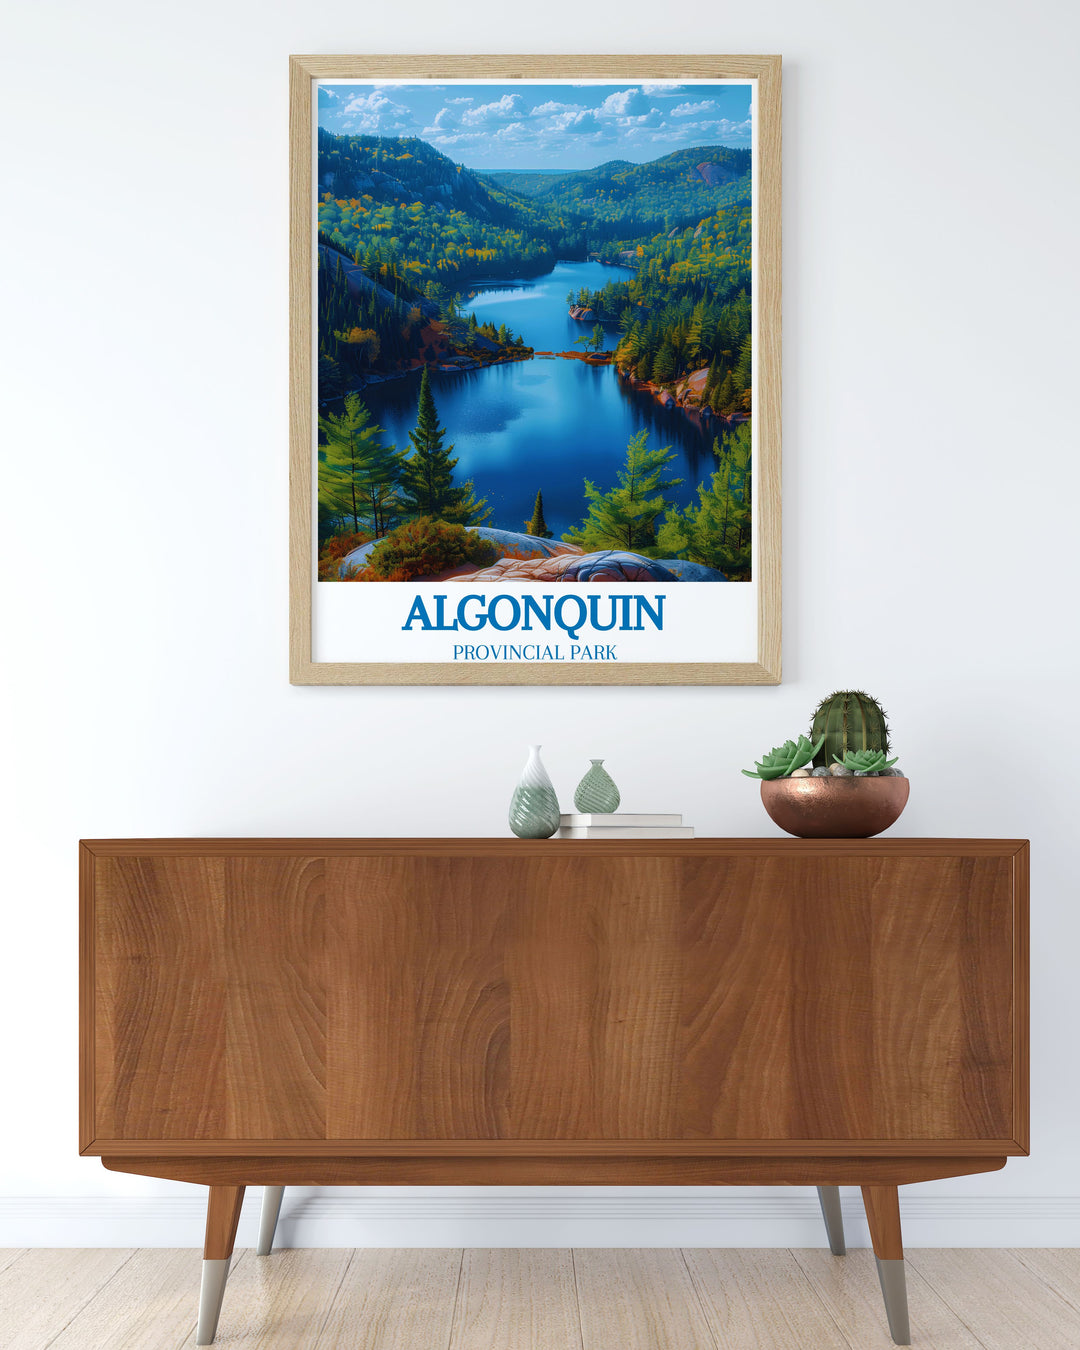 Travel print capturing the serene beauty and historical depth of Algonquin Provincial Park, ideal for gifting to those who appreciate Canadas natural landscapes.